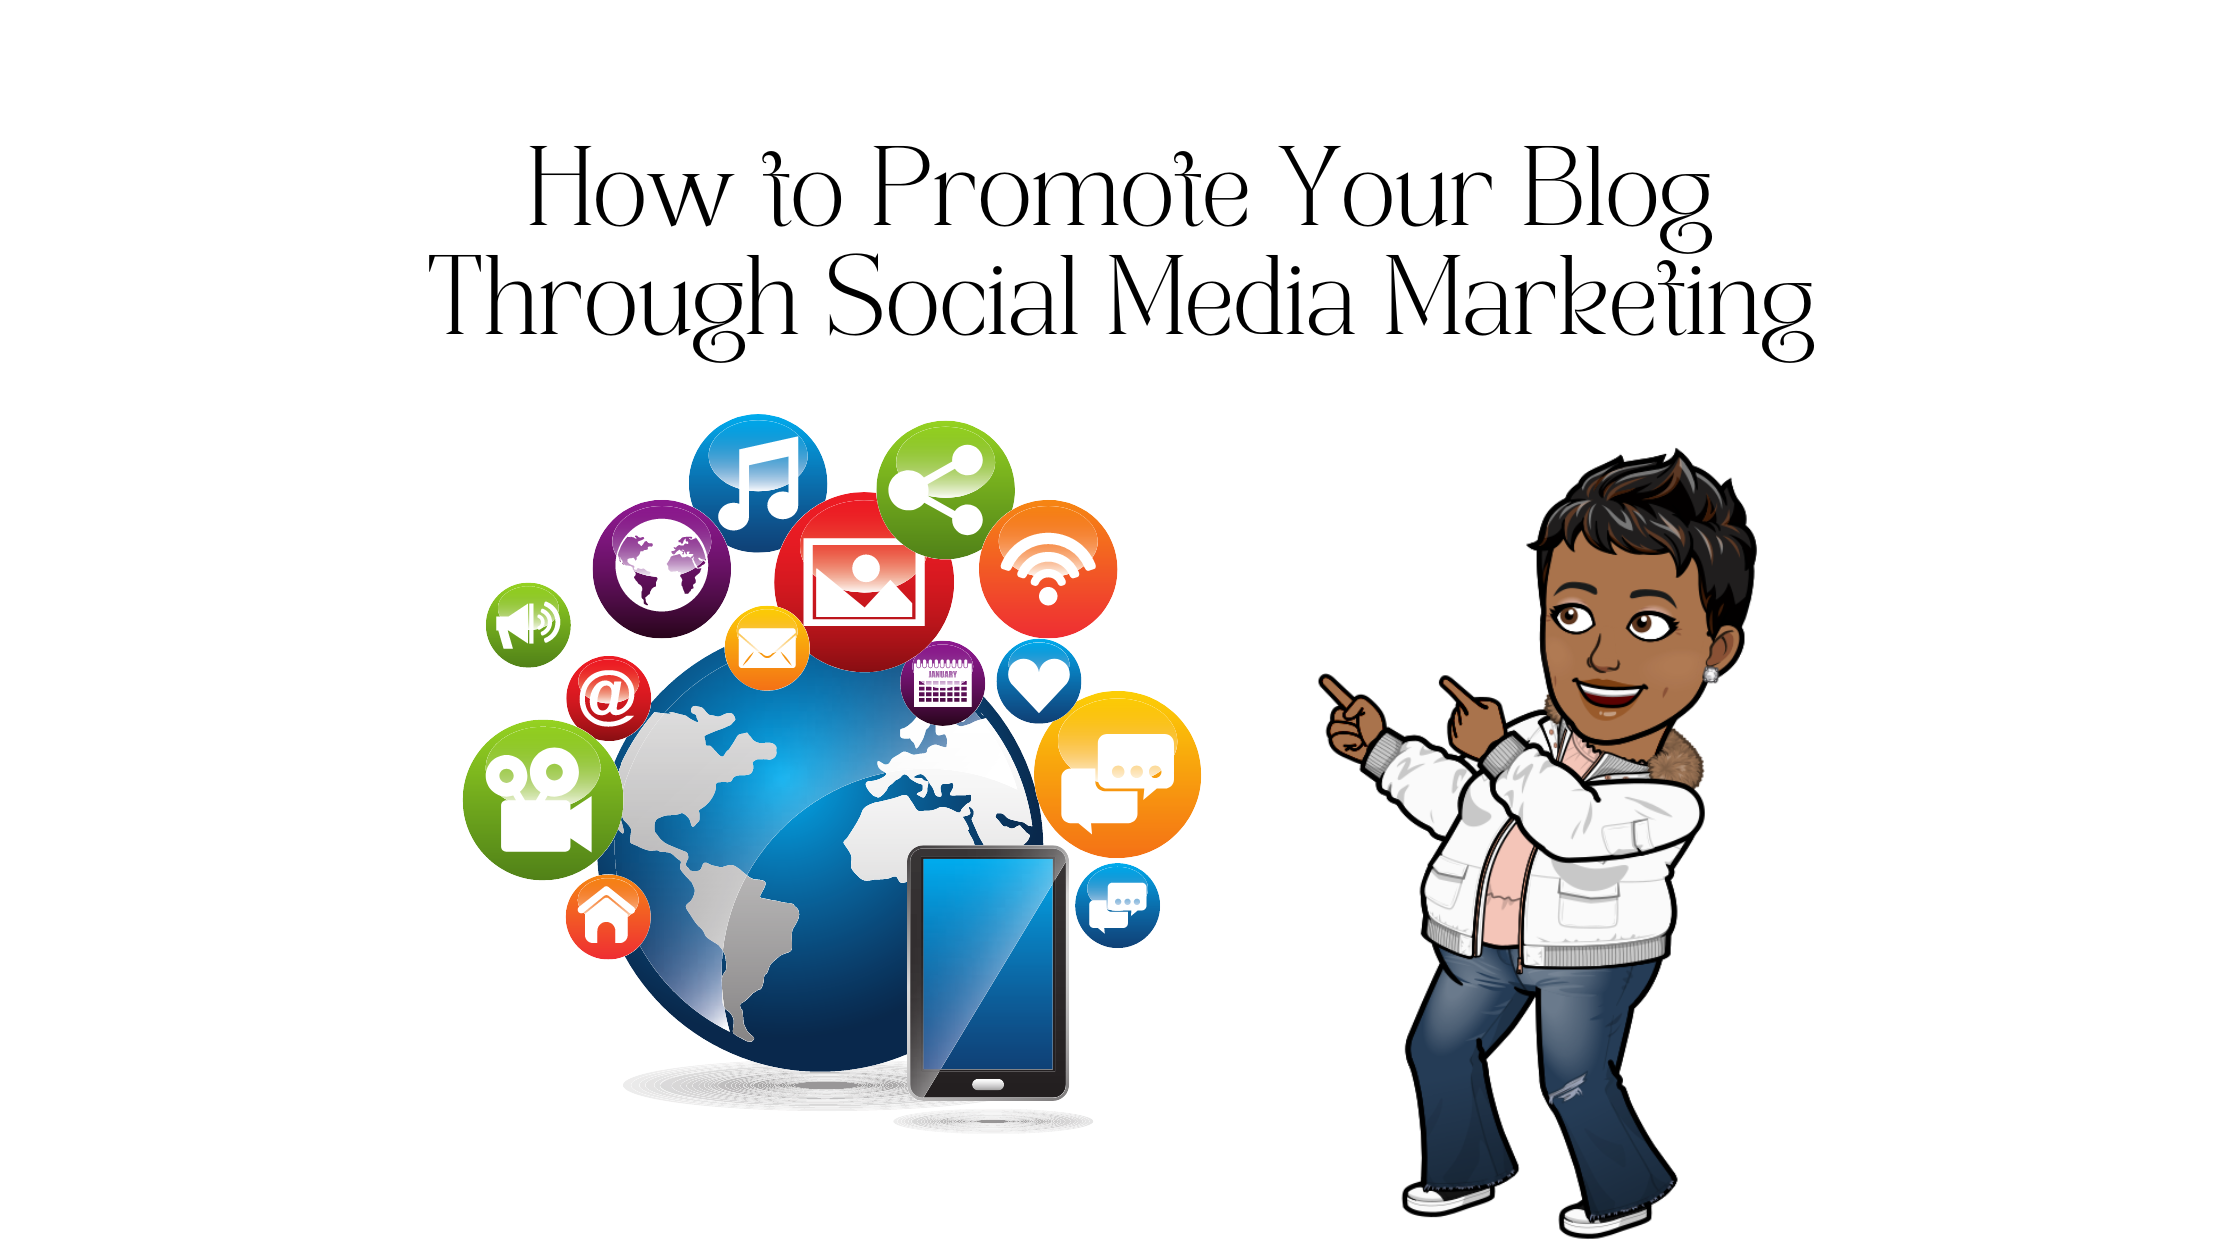 How to Promote Your Blog Through Social Media Marketing